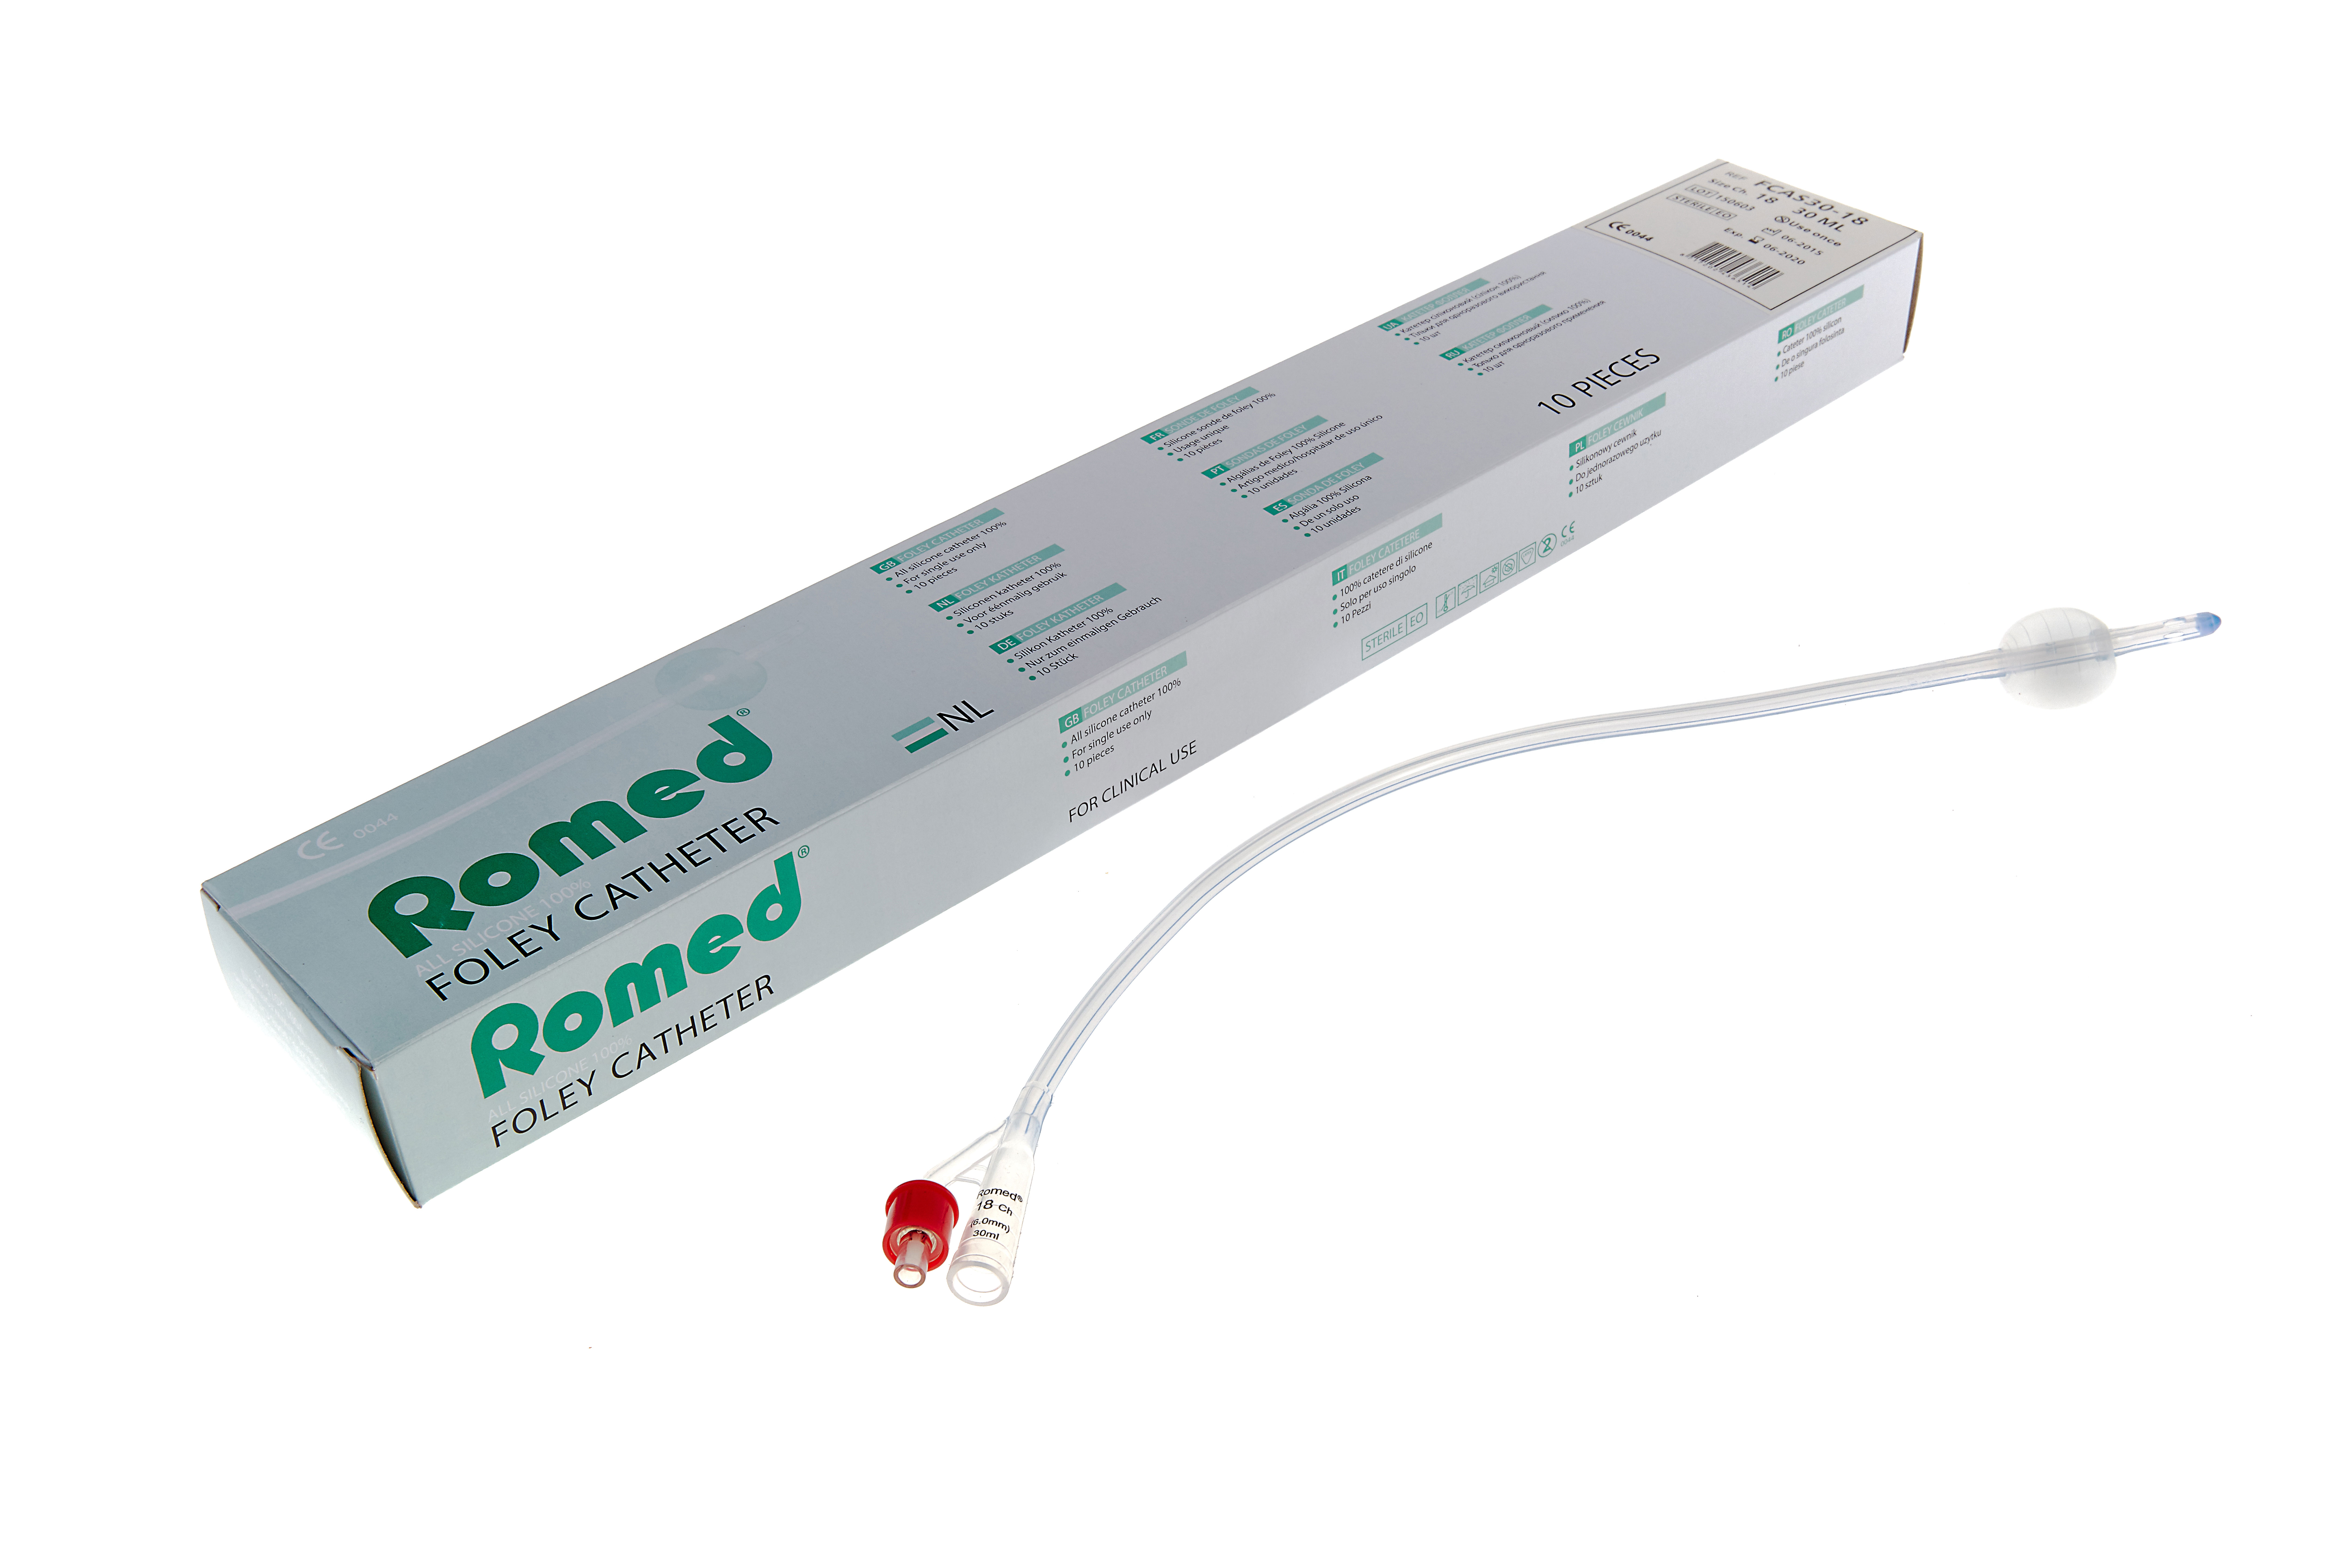 FCAS10-12 Romed Foley balloon catheters 2-way, ch. 12, all silicone, 10ml, sterile per piece, per 10 pcs in an inner box, 10 x 10 pcs = 100 pcs in a carton.